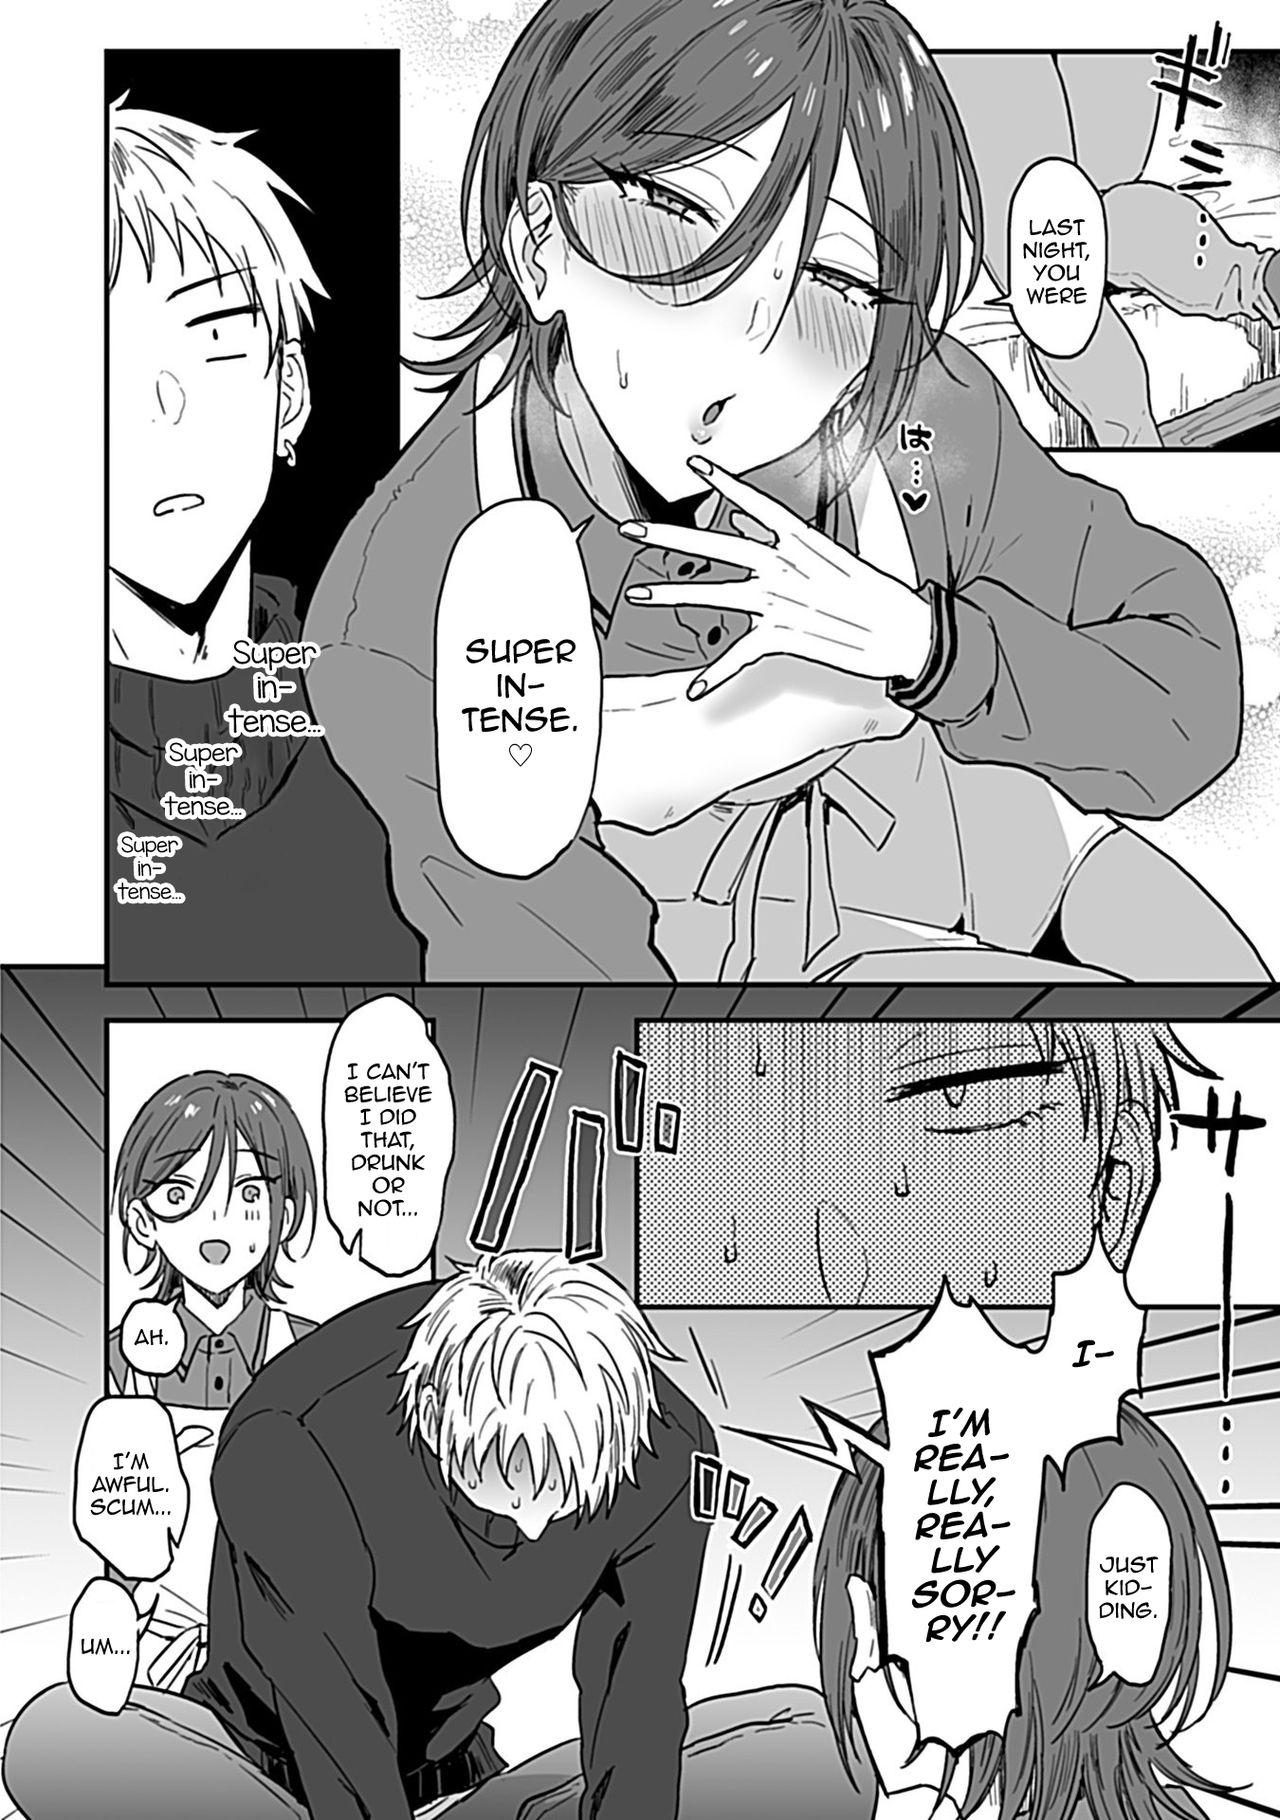 Top [Ainaryumu] Tonari no Ecchi na Onii-san. 1 - The sexy boy who lives in the next! [R18] [English] [mysterymeat3] Real Amateurs - Page 8